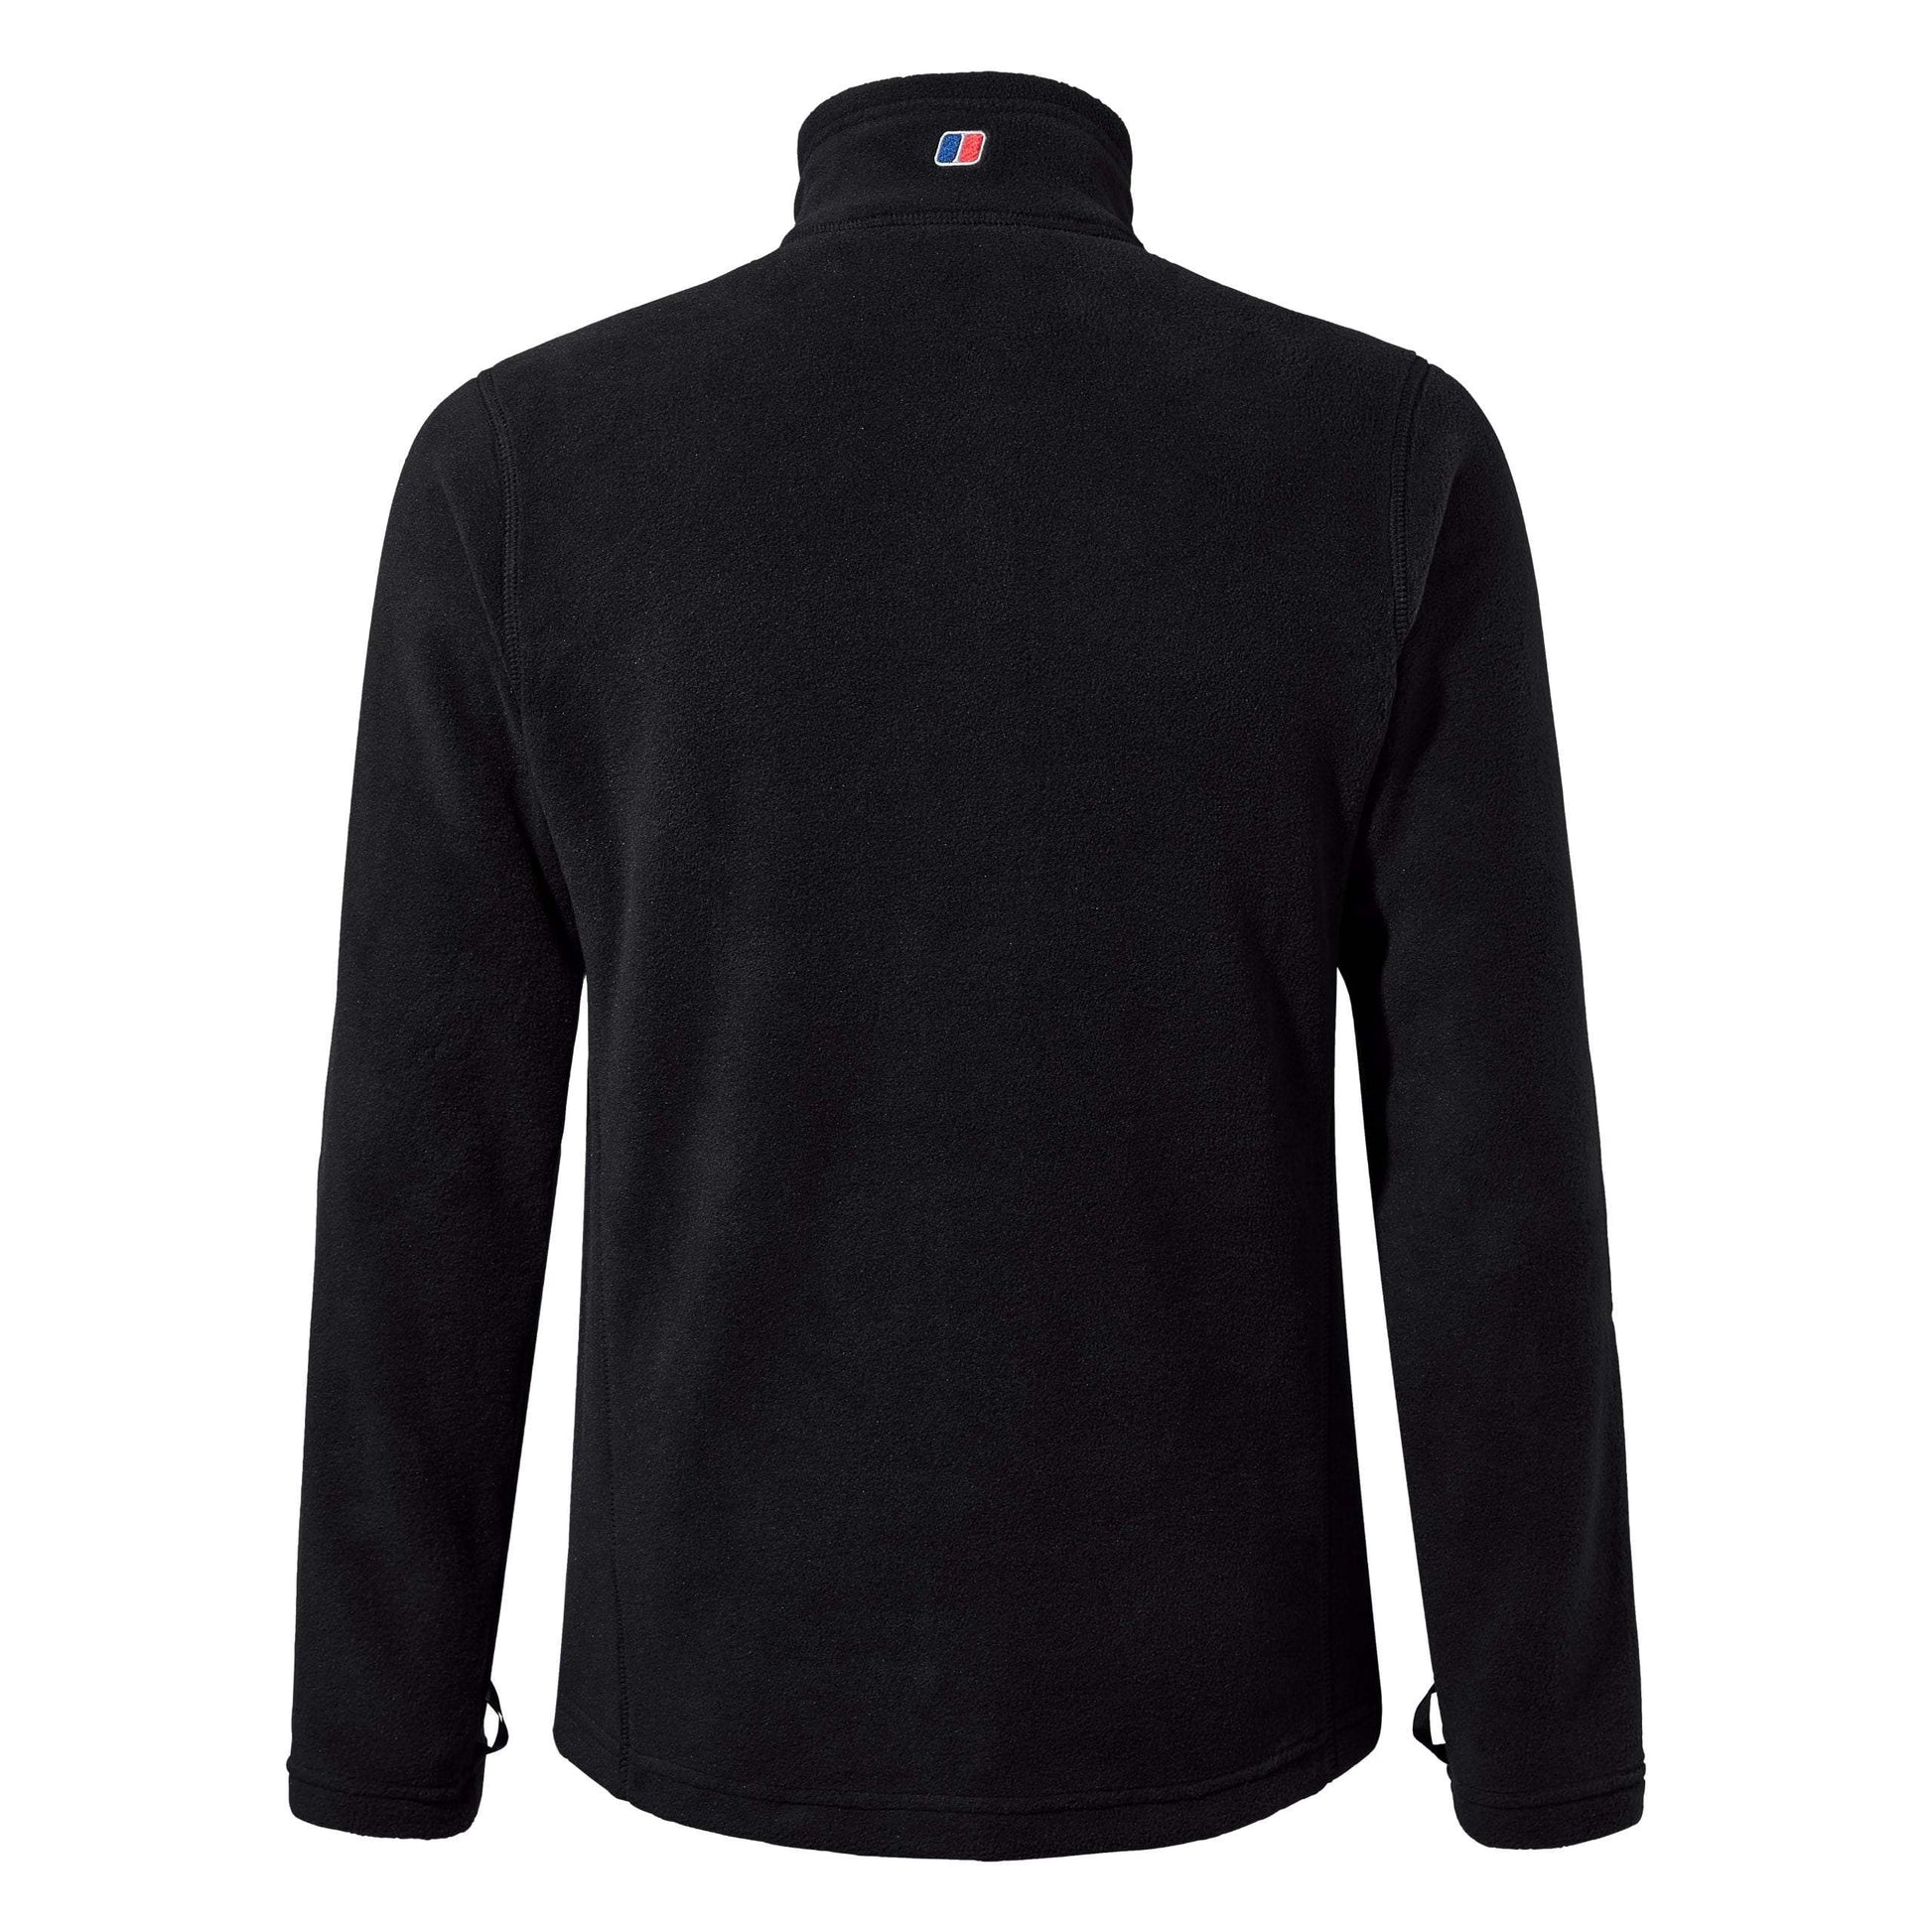 Berghaus Men’s Prism PT IA FL Jkt - The Luxury Promotional Gifts Company Limited